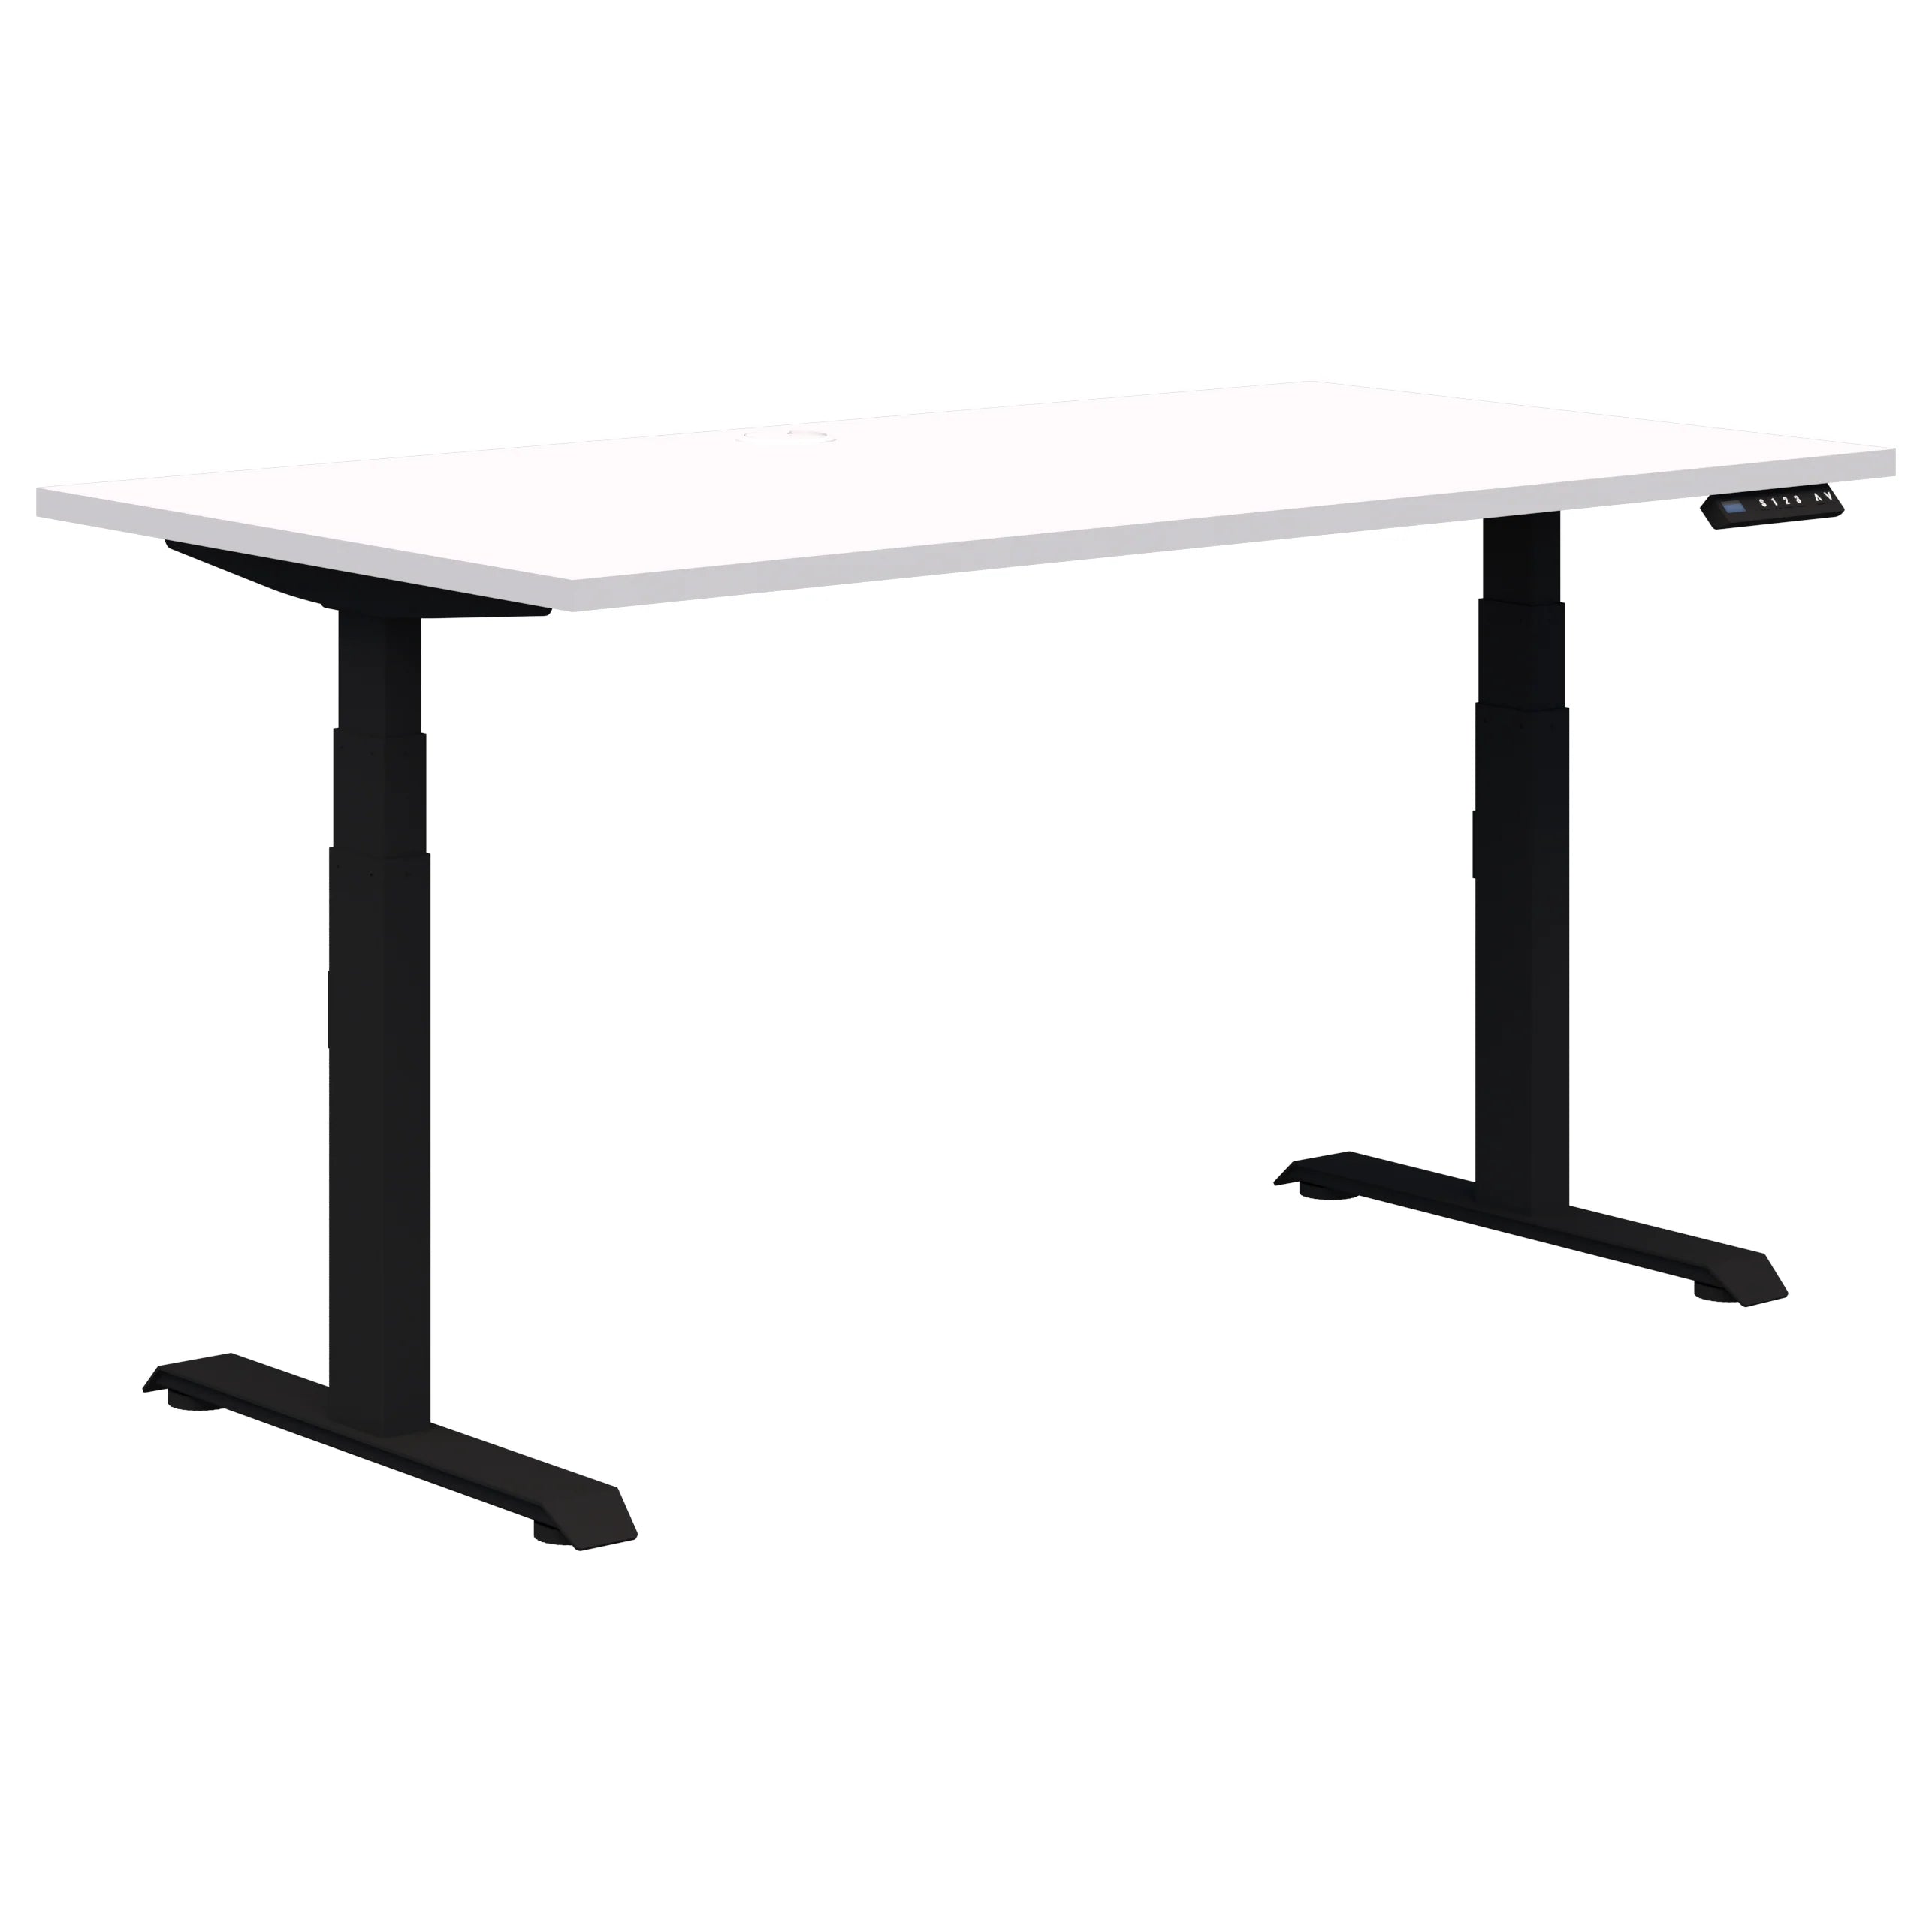 Summit electric height adjustable office desk with black frame and snow velvet white top.